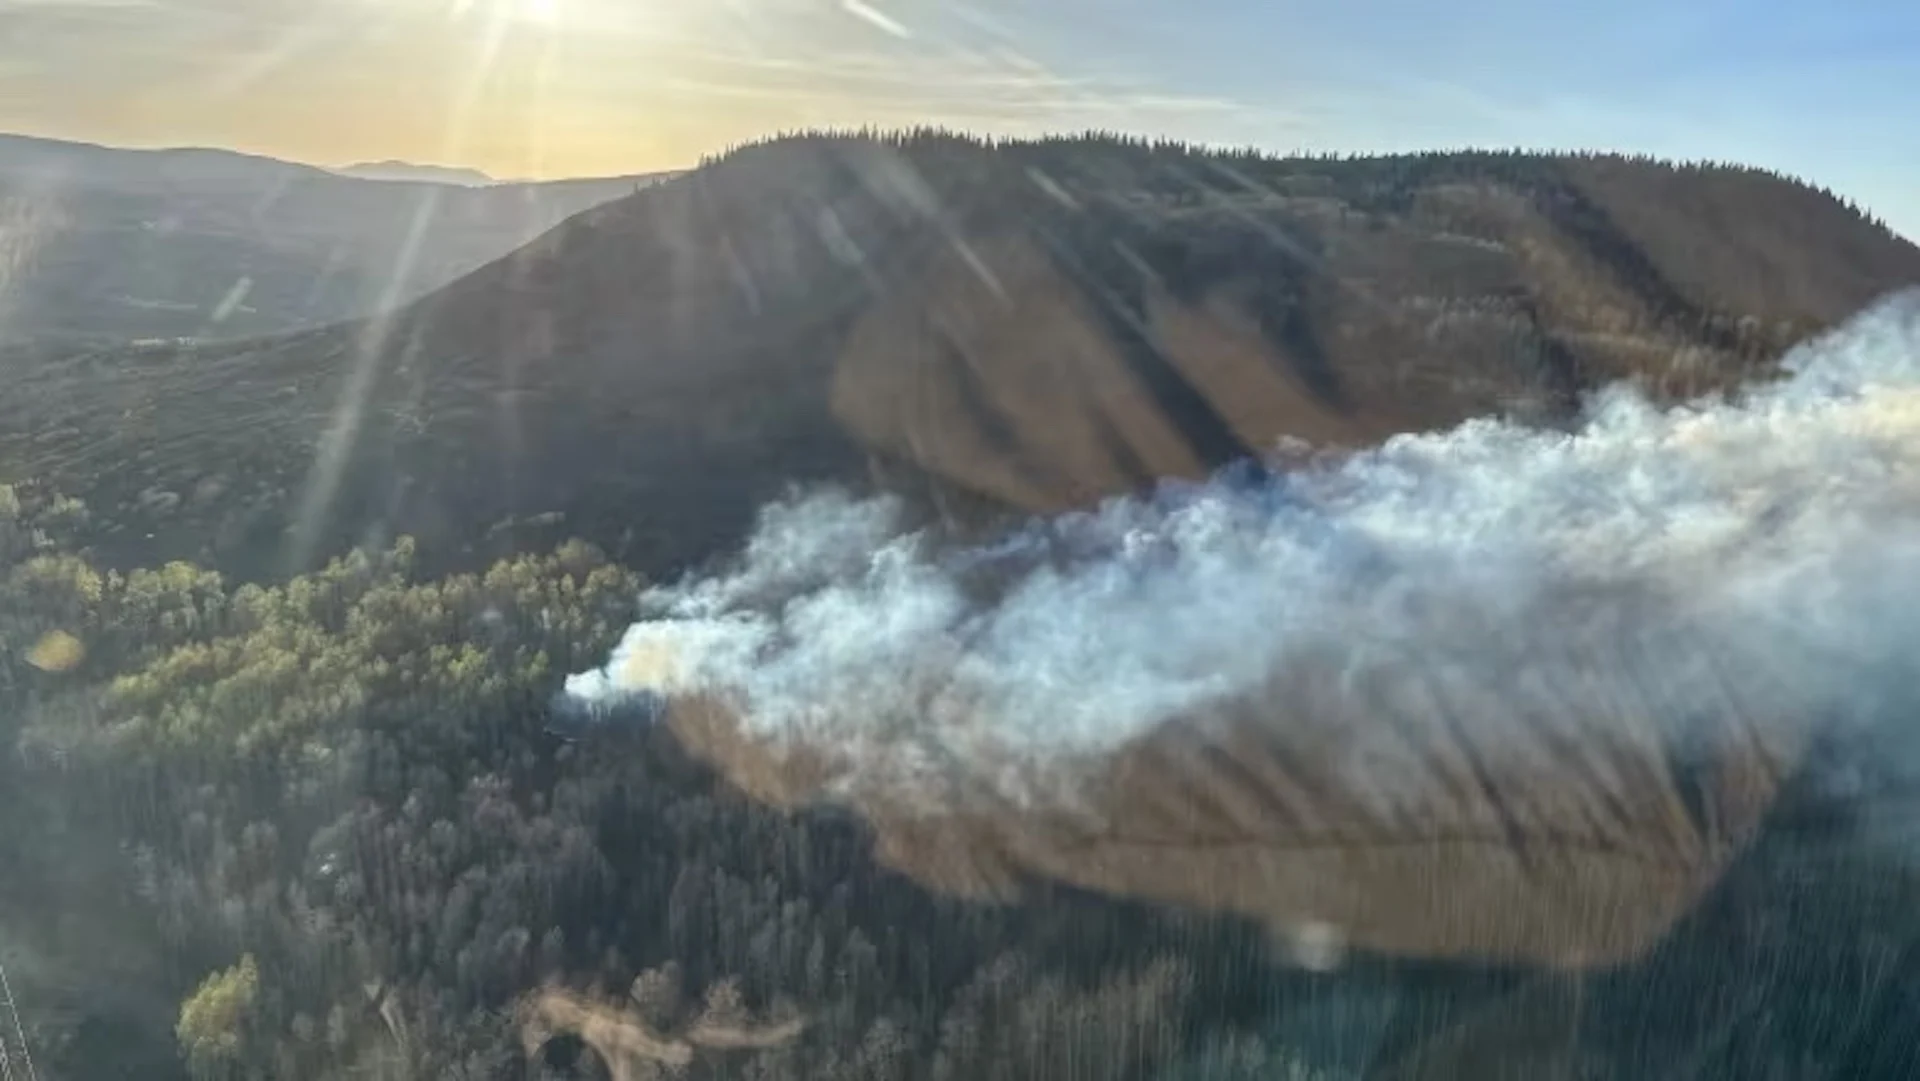 'Serious weather event' likely to make B.C. wildfires worse, forecasters warn